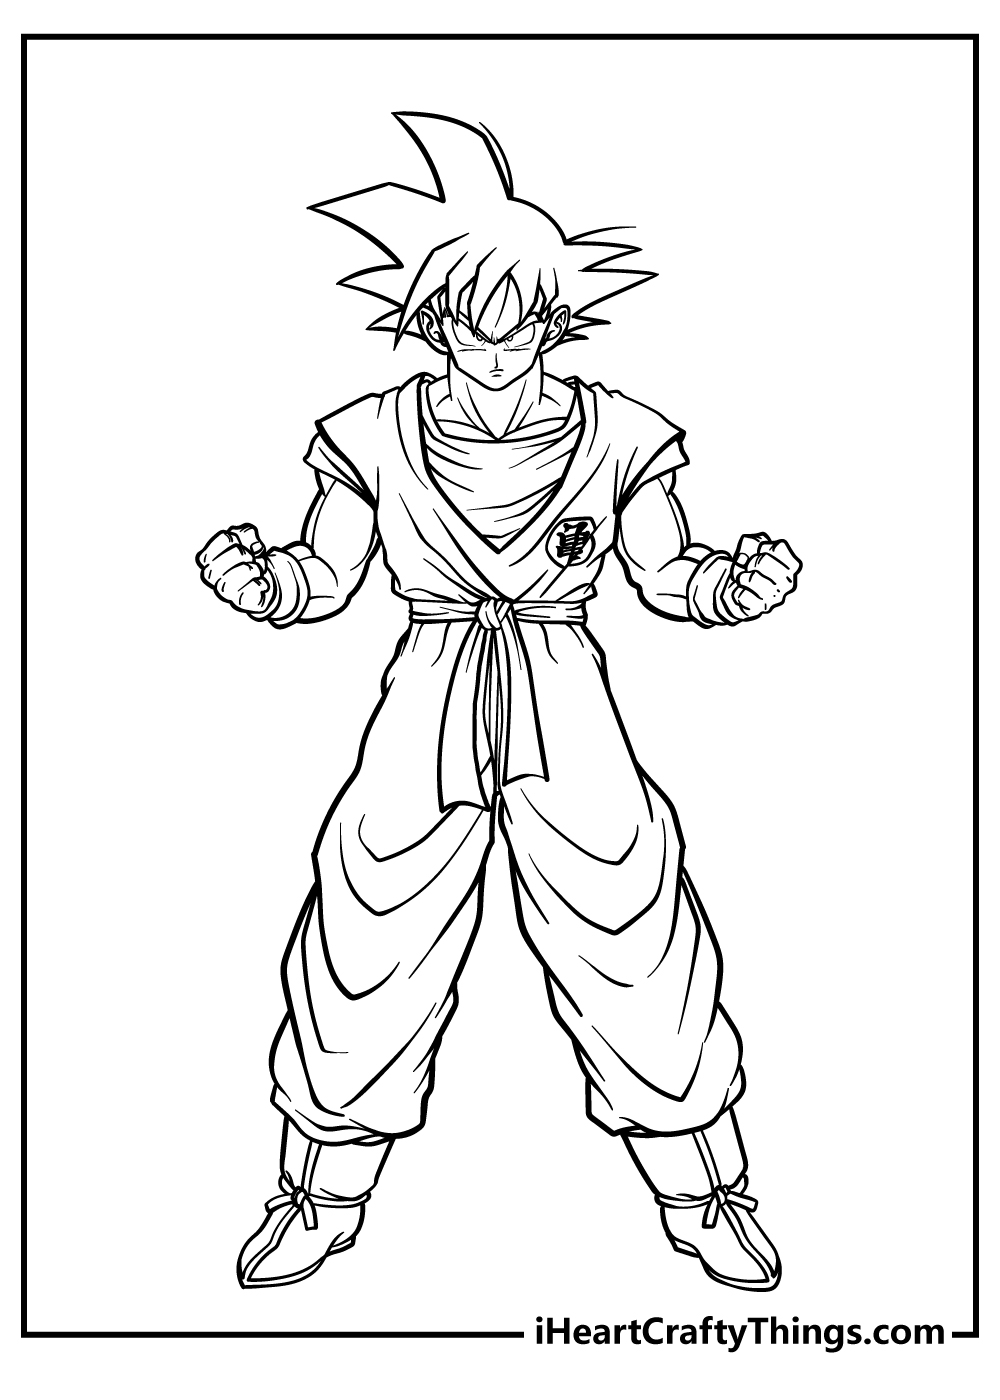 Printable Anime Coloring Pages Updated 20